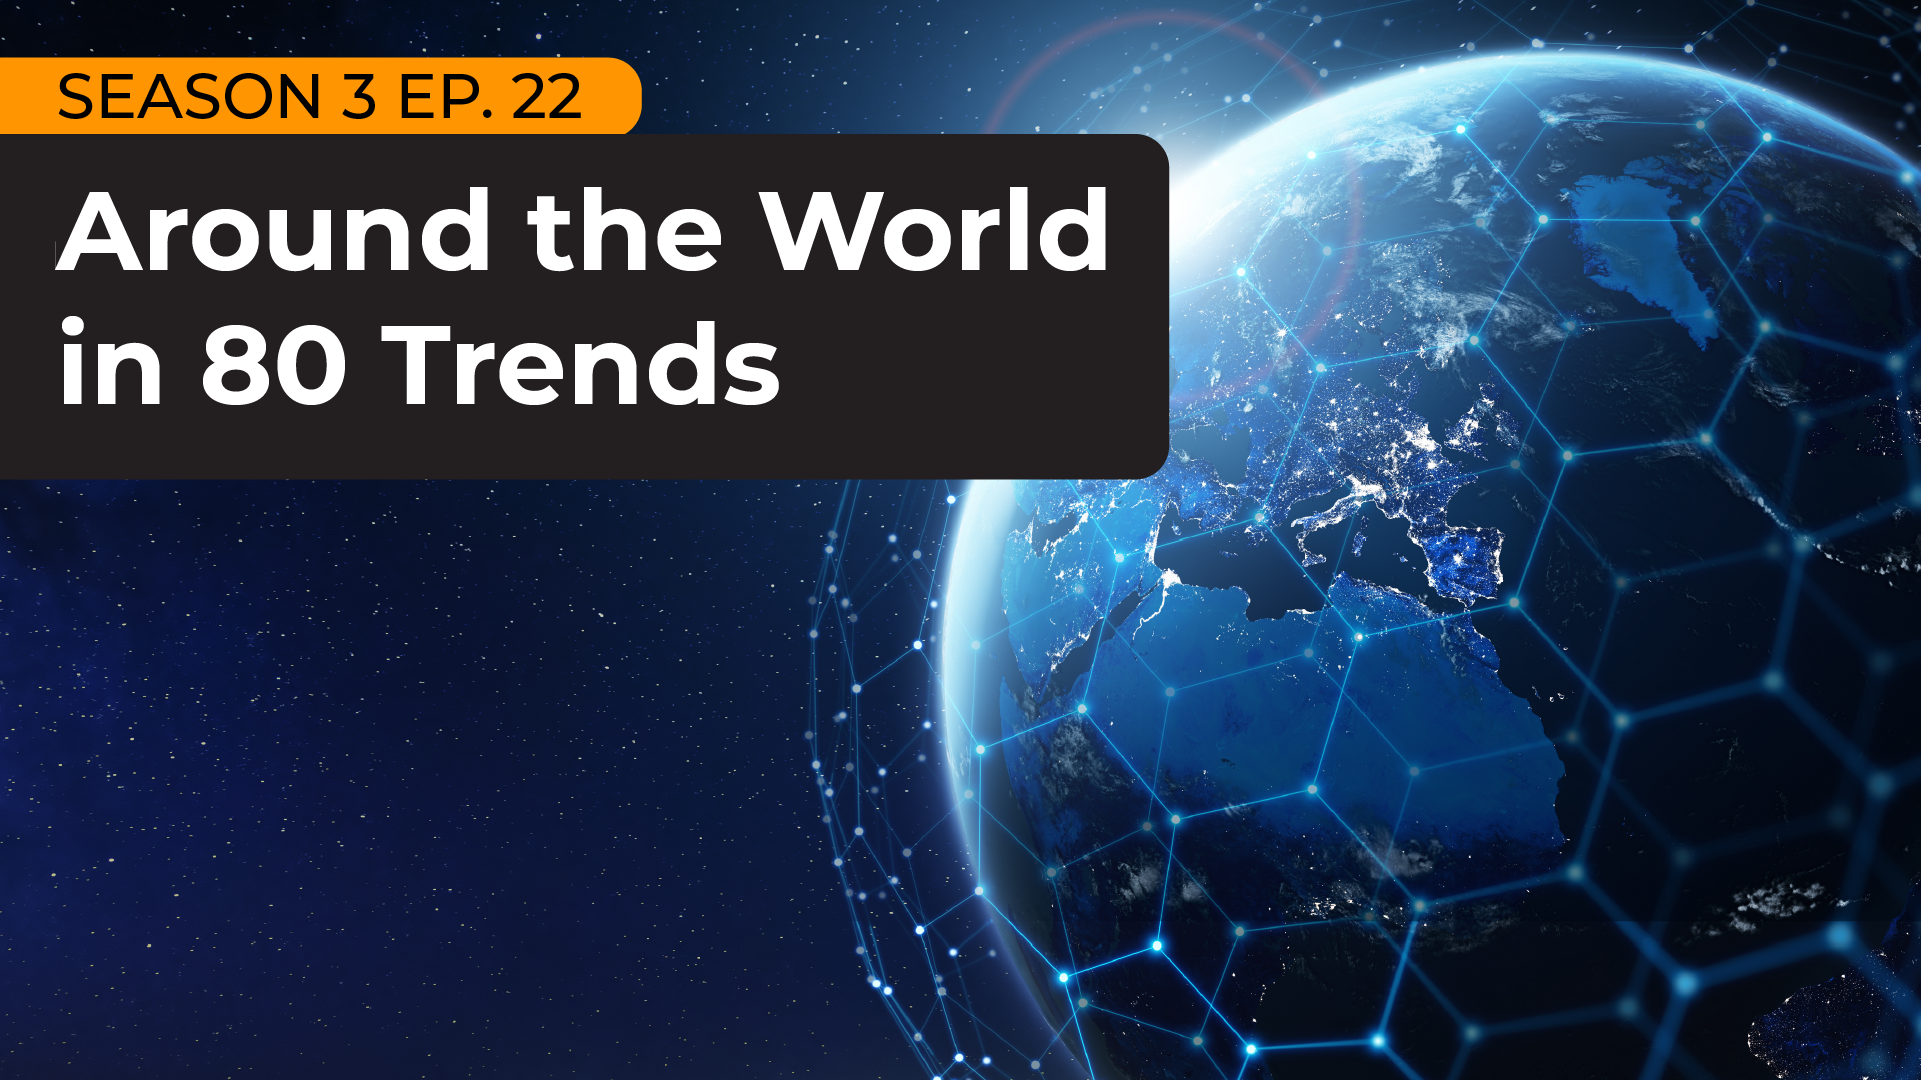 Join hosts Jack Li, Claire Conaghan, Gerald Oksanen, and Renee Lee-Wege as they dive into the latest global trends happening in the wild, consumer thoughts on global trends and menu inspiration from around the world.